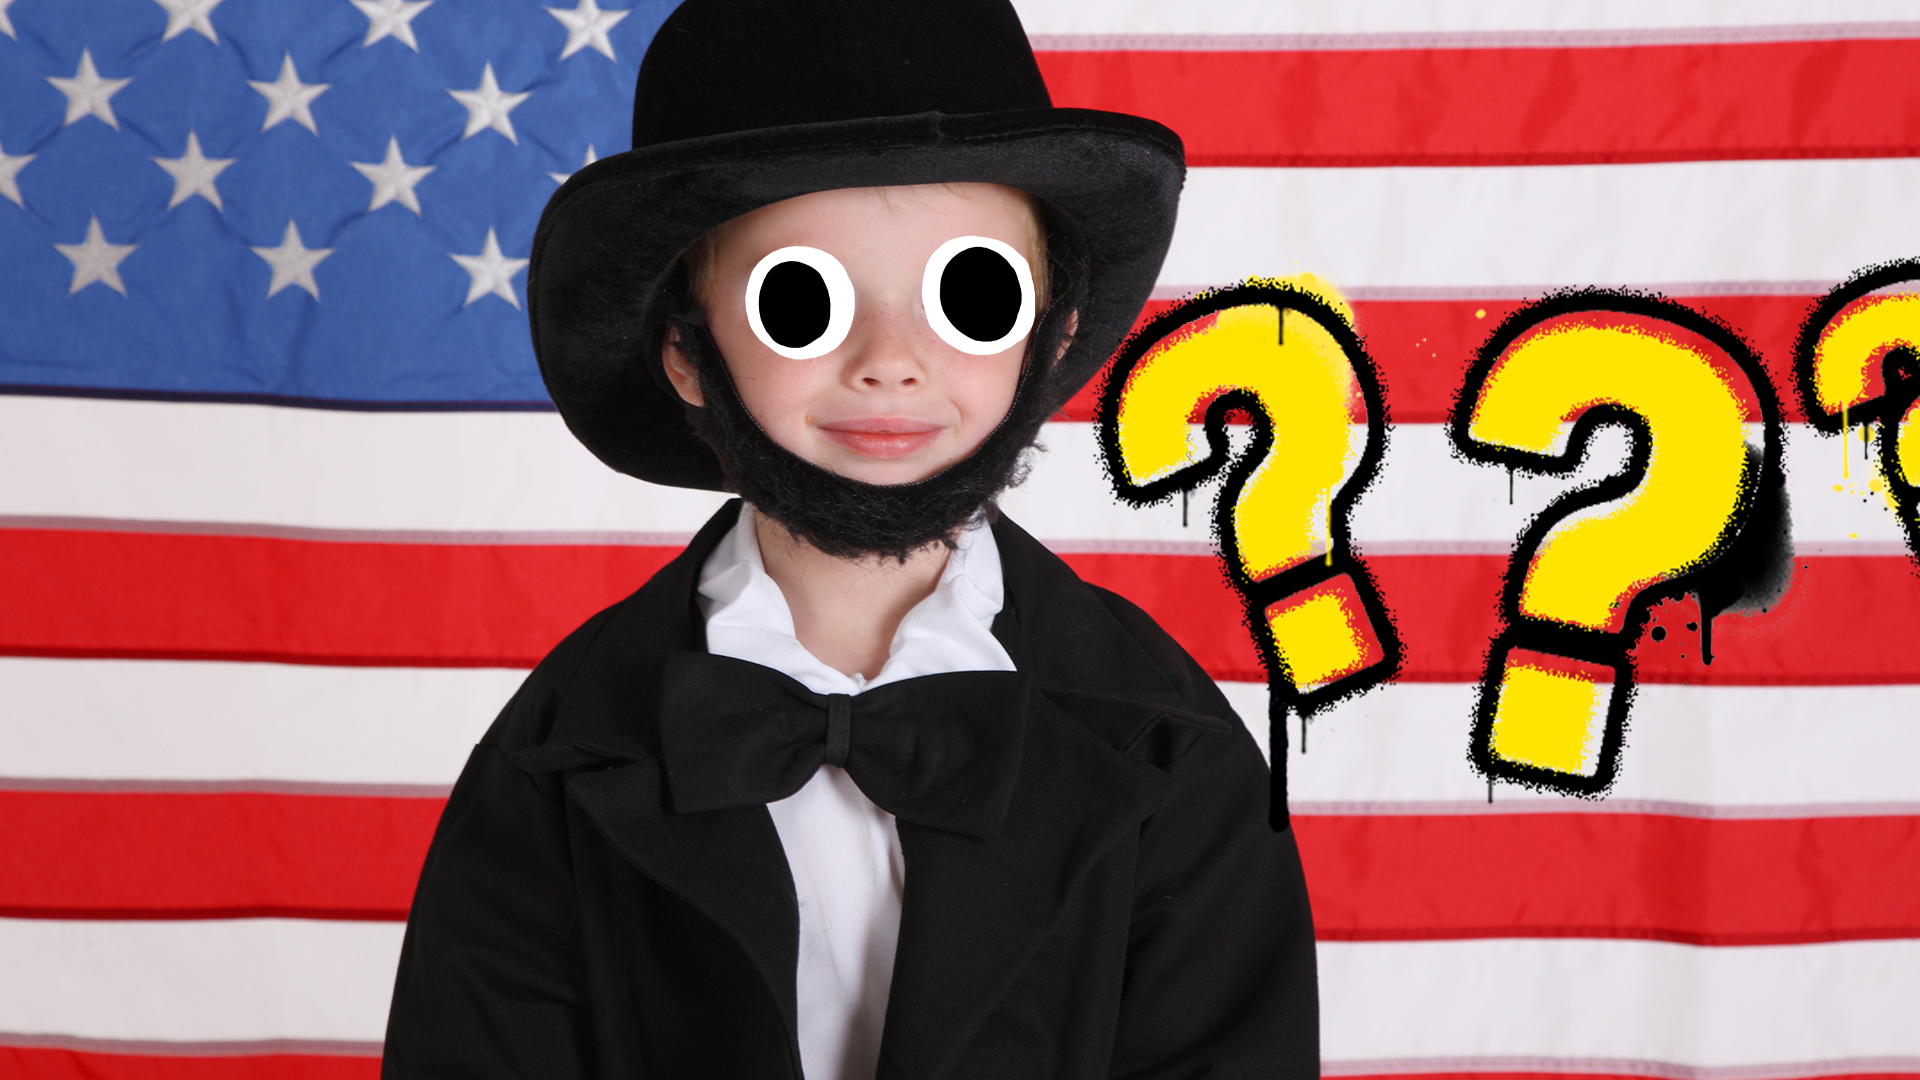 Boy dressed as president with flag and question marks